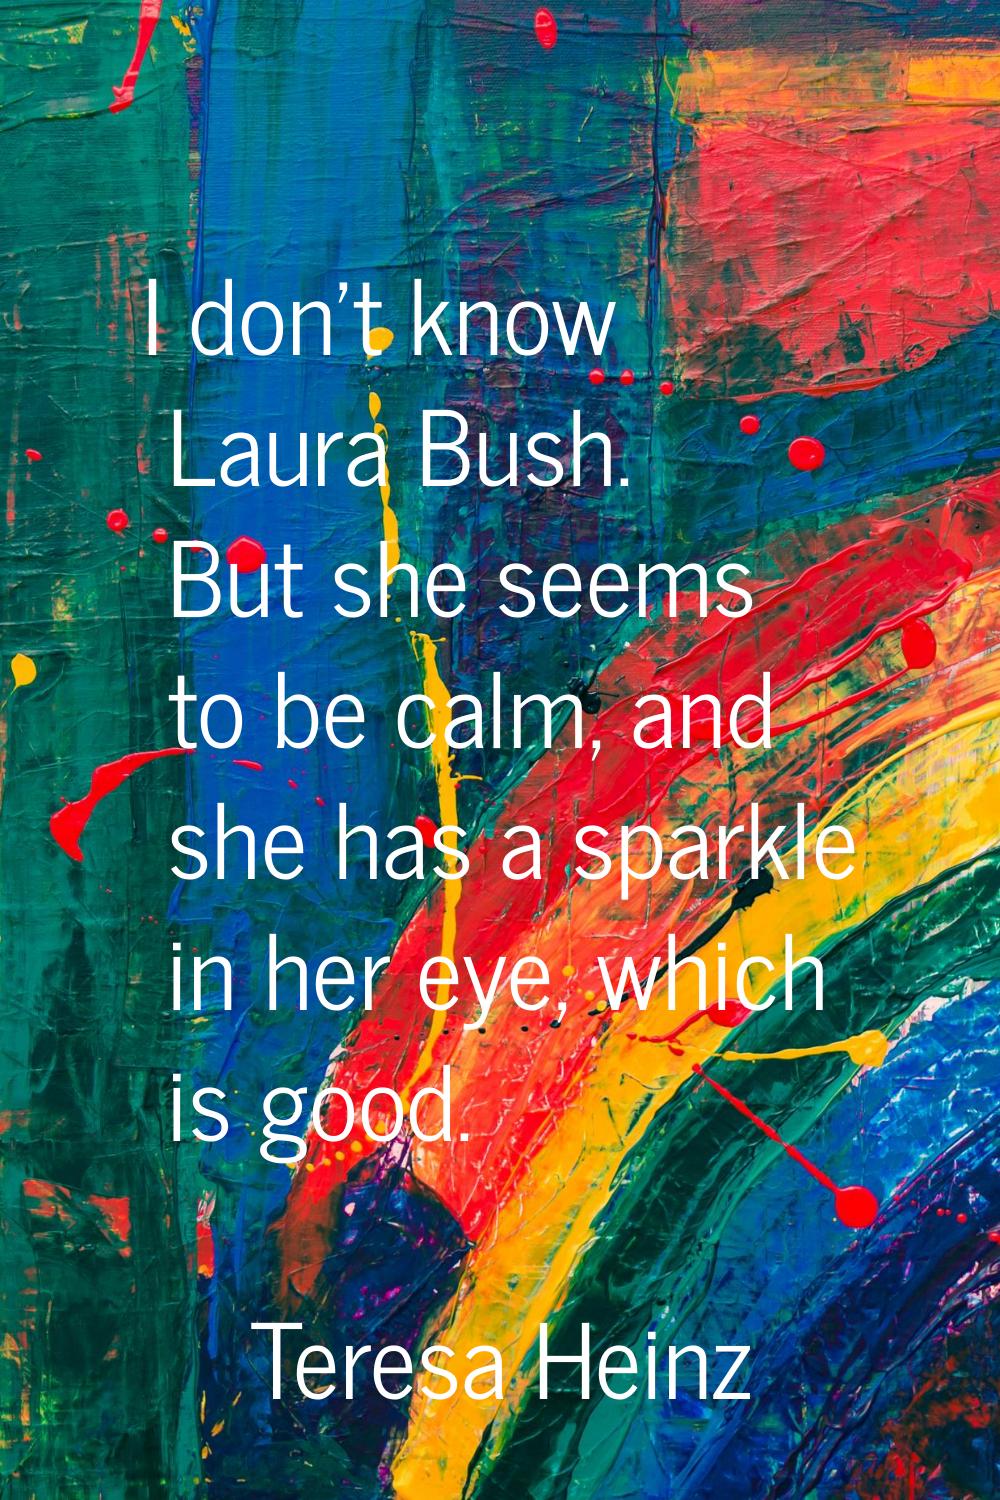 I don't know Laura Bush. But she seems to be calm, and she has a sparkle in her eye, which is good.